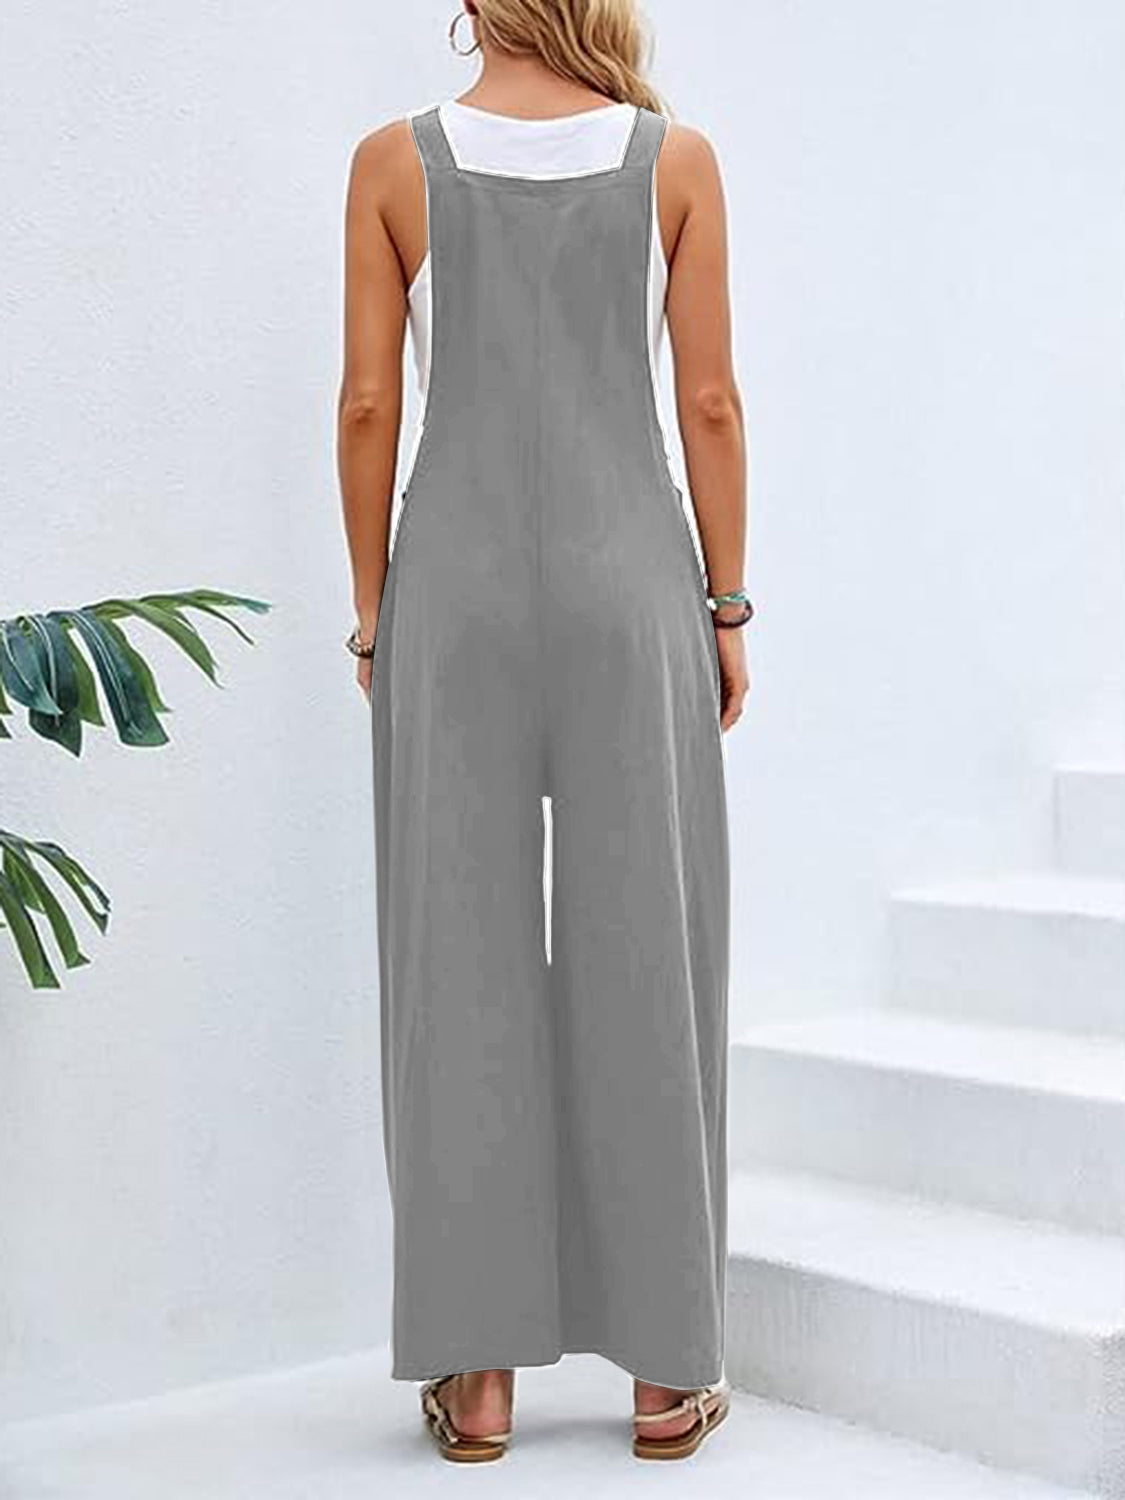 Wide Leg Overalls with Pockets - Bottoms - Overalls - 8 - 2024